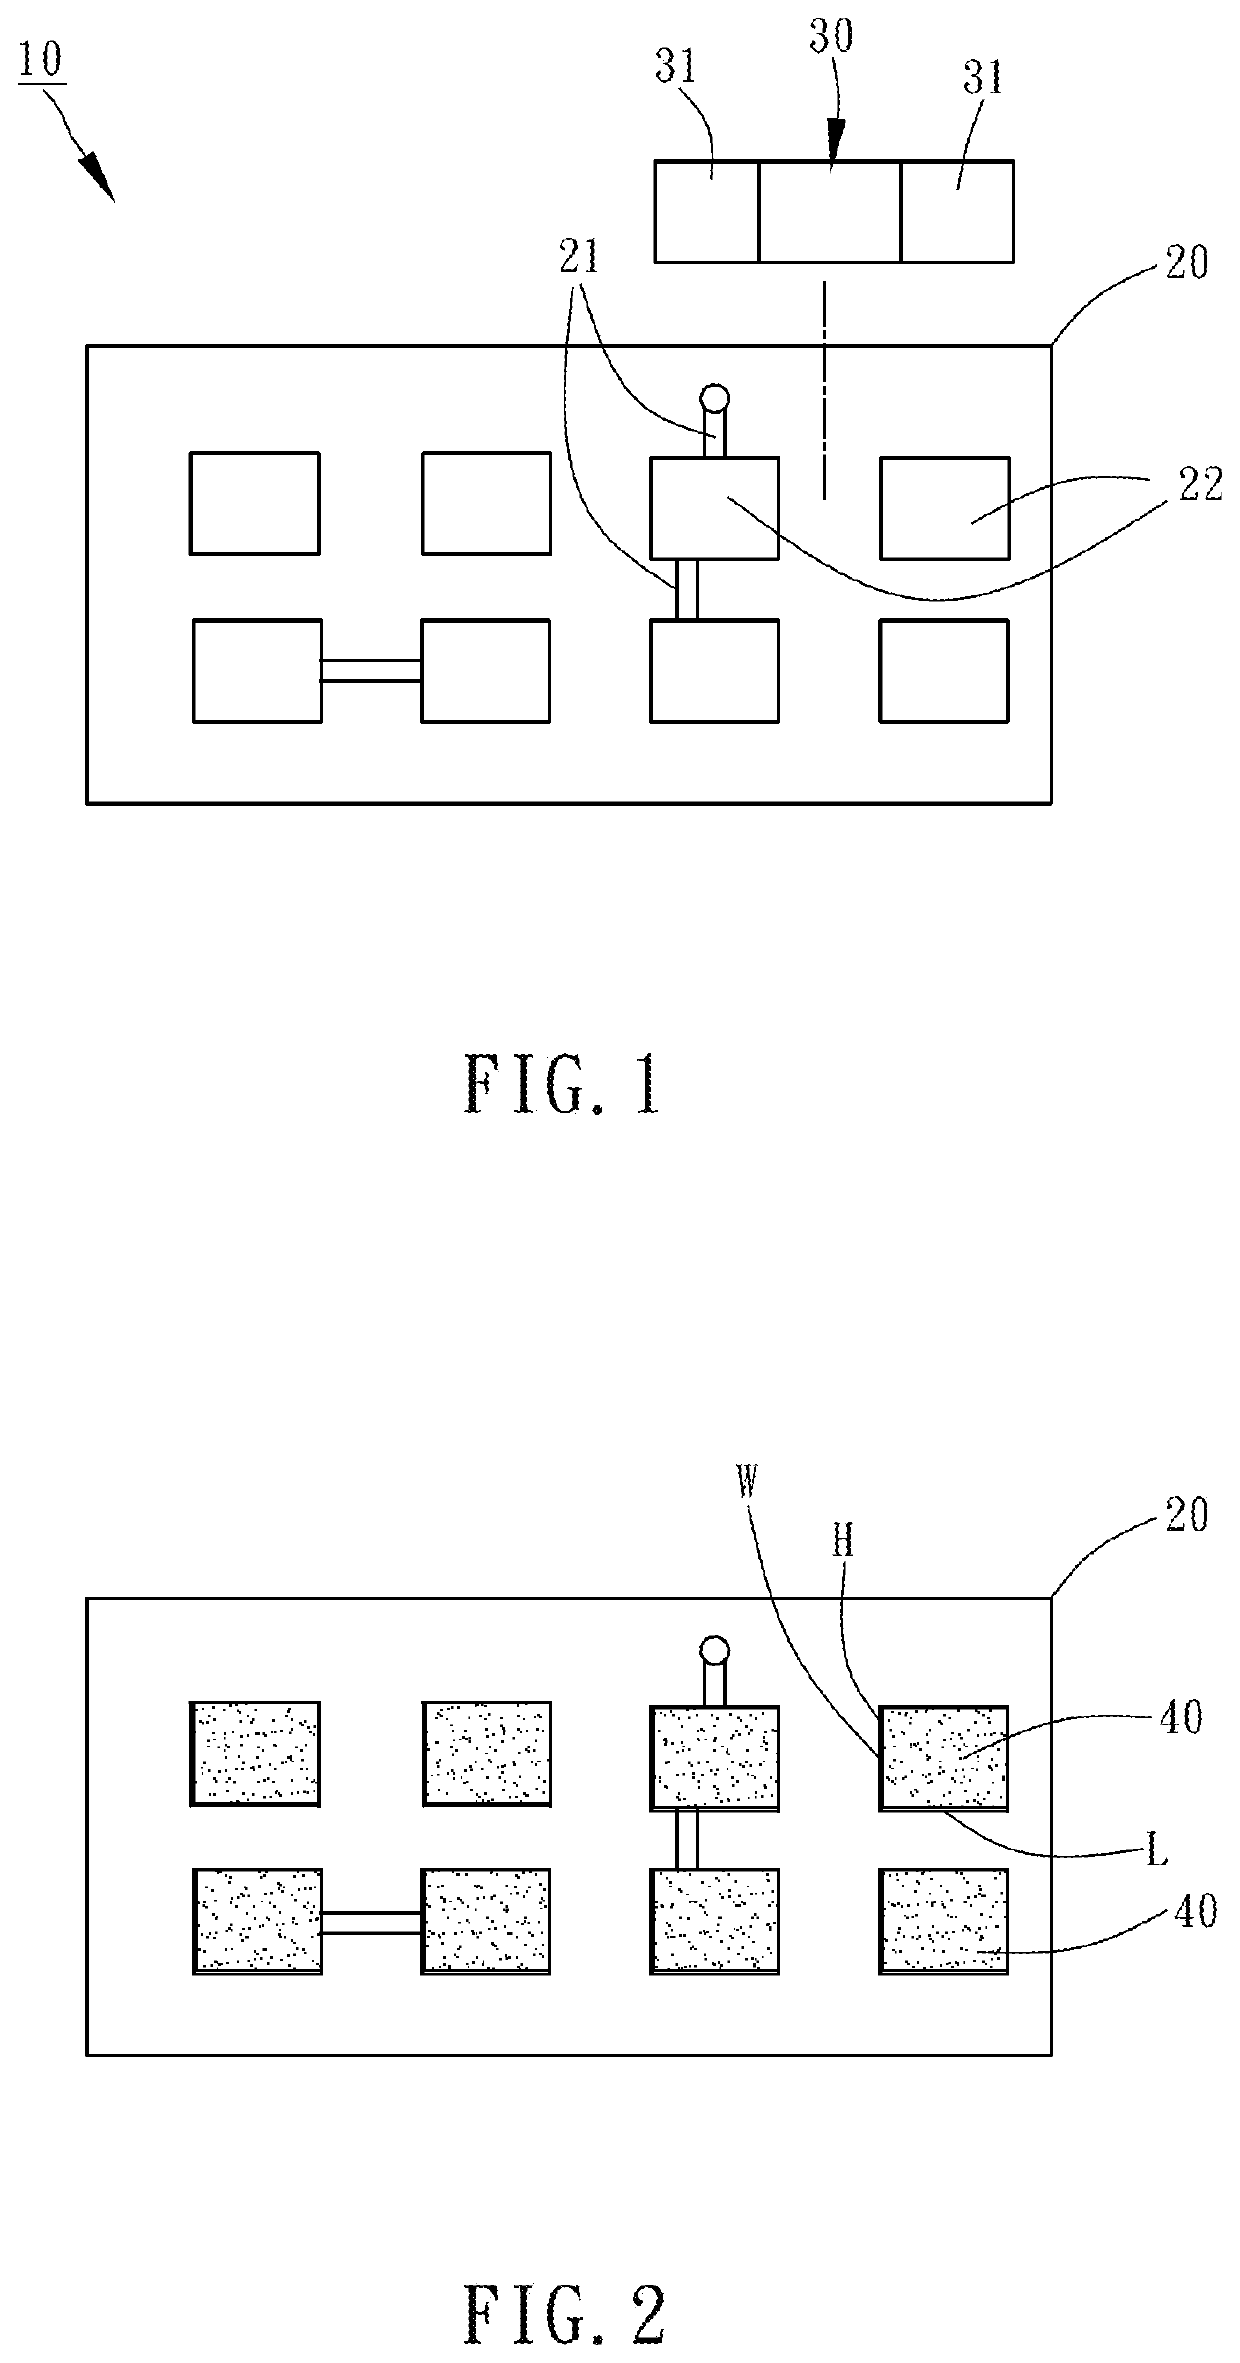 Circuit board assembly inspection method